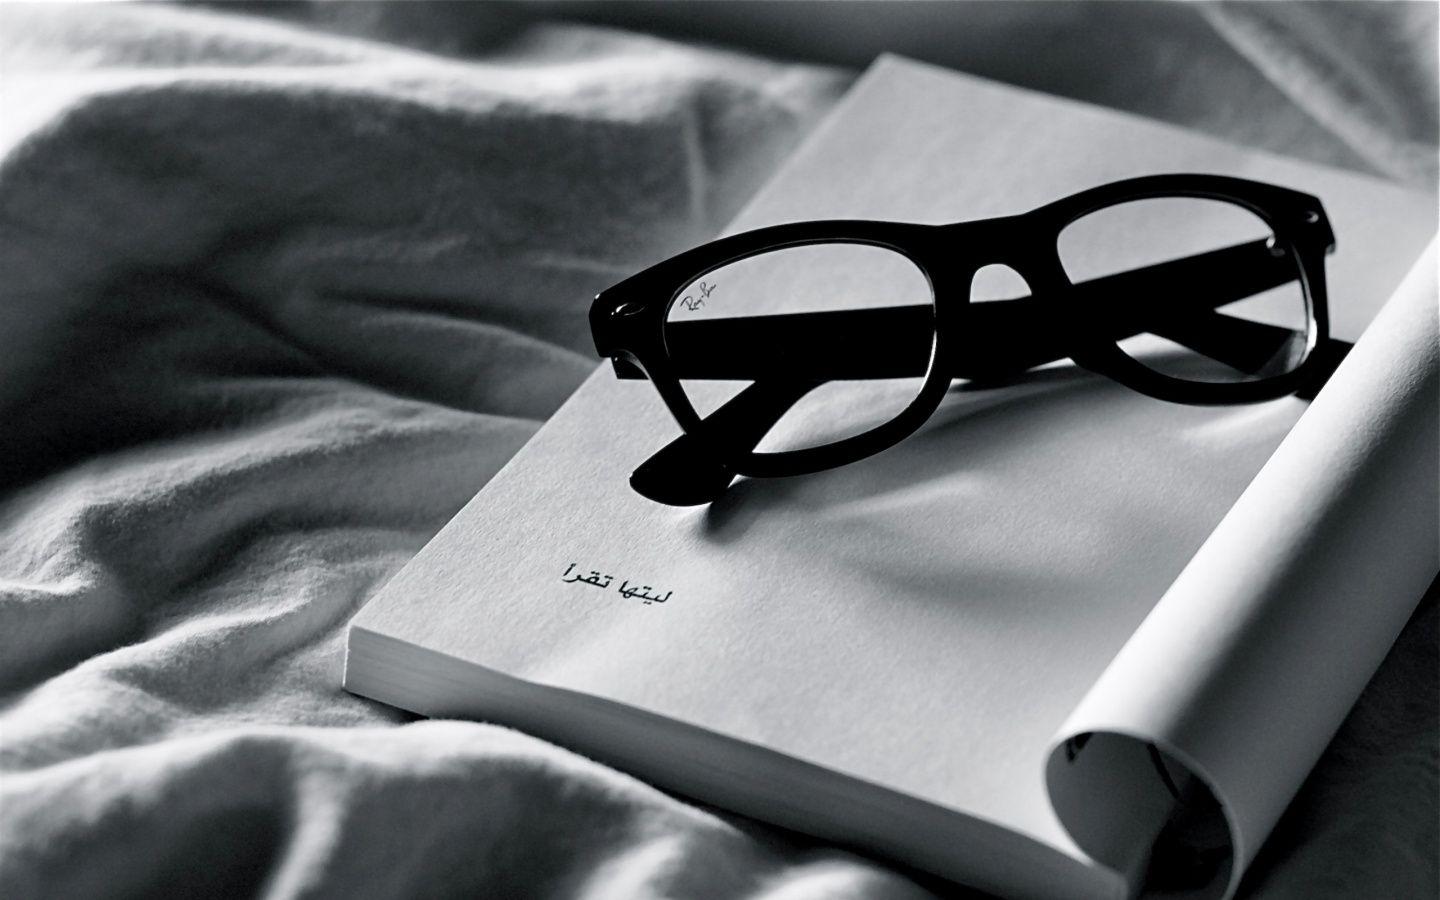 beautiful iPad wallpaper for a book lover. Ray ban glasses